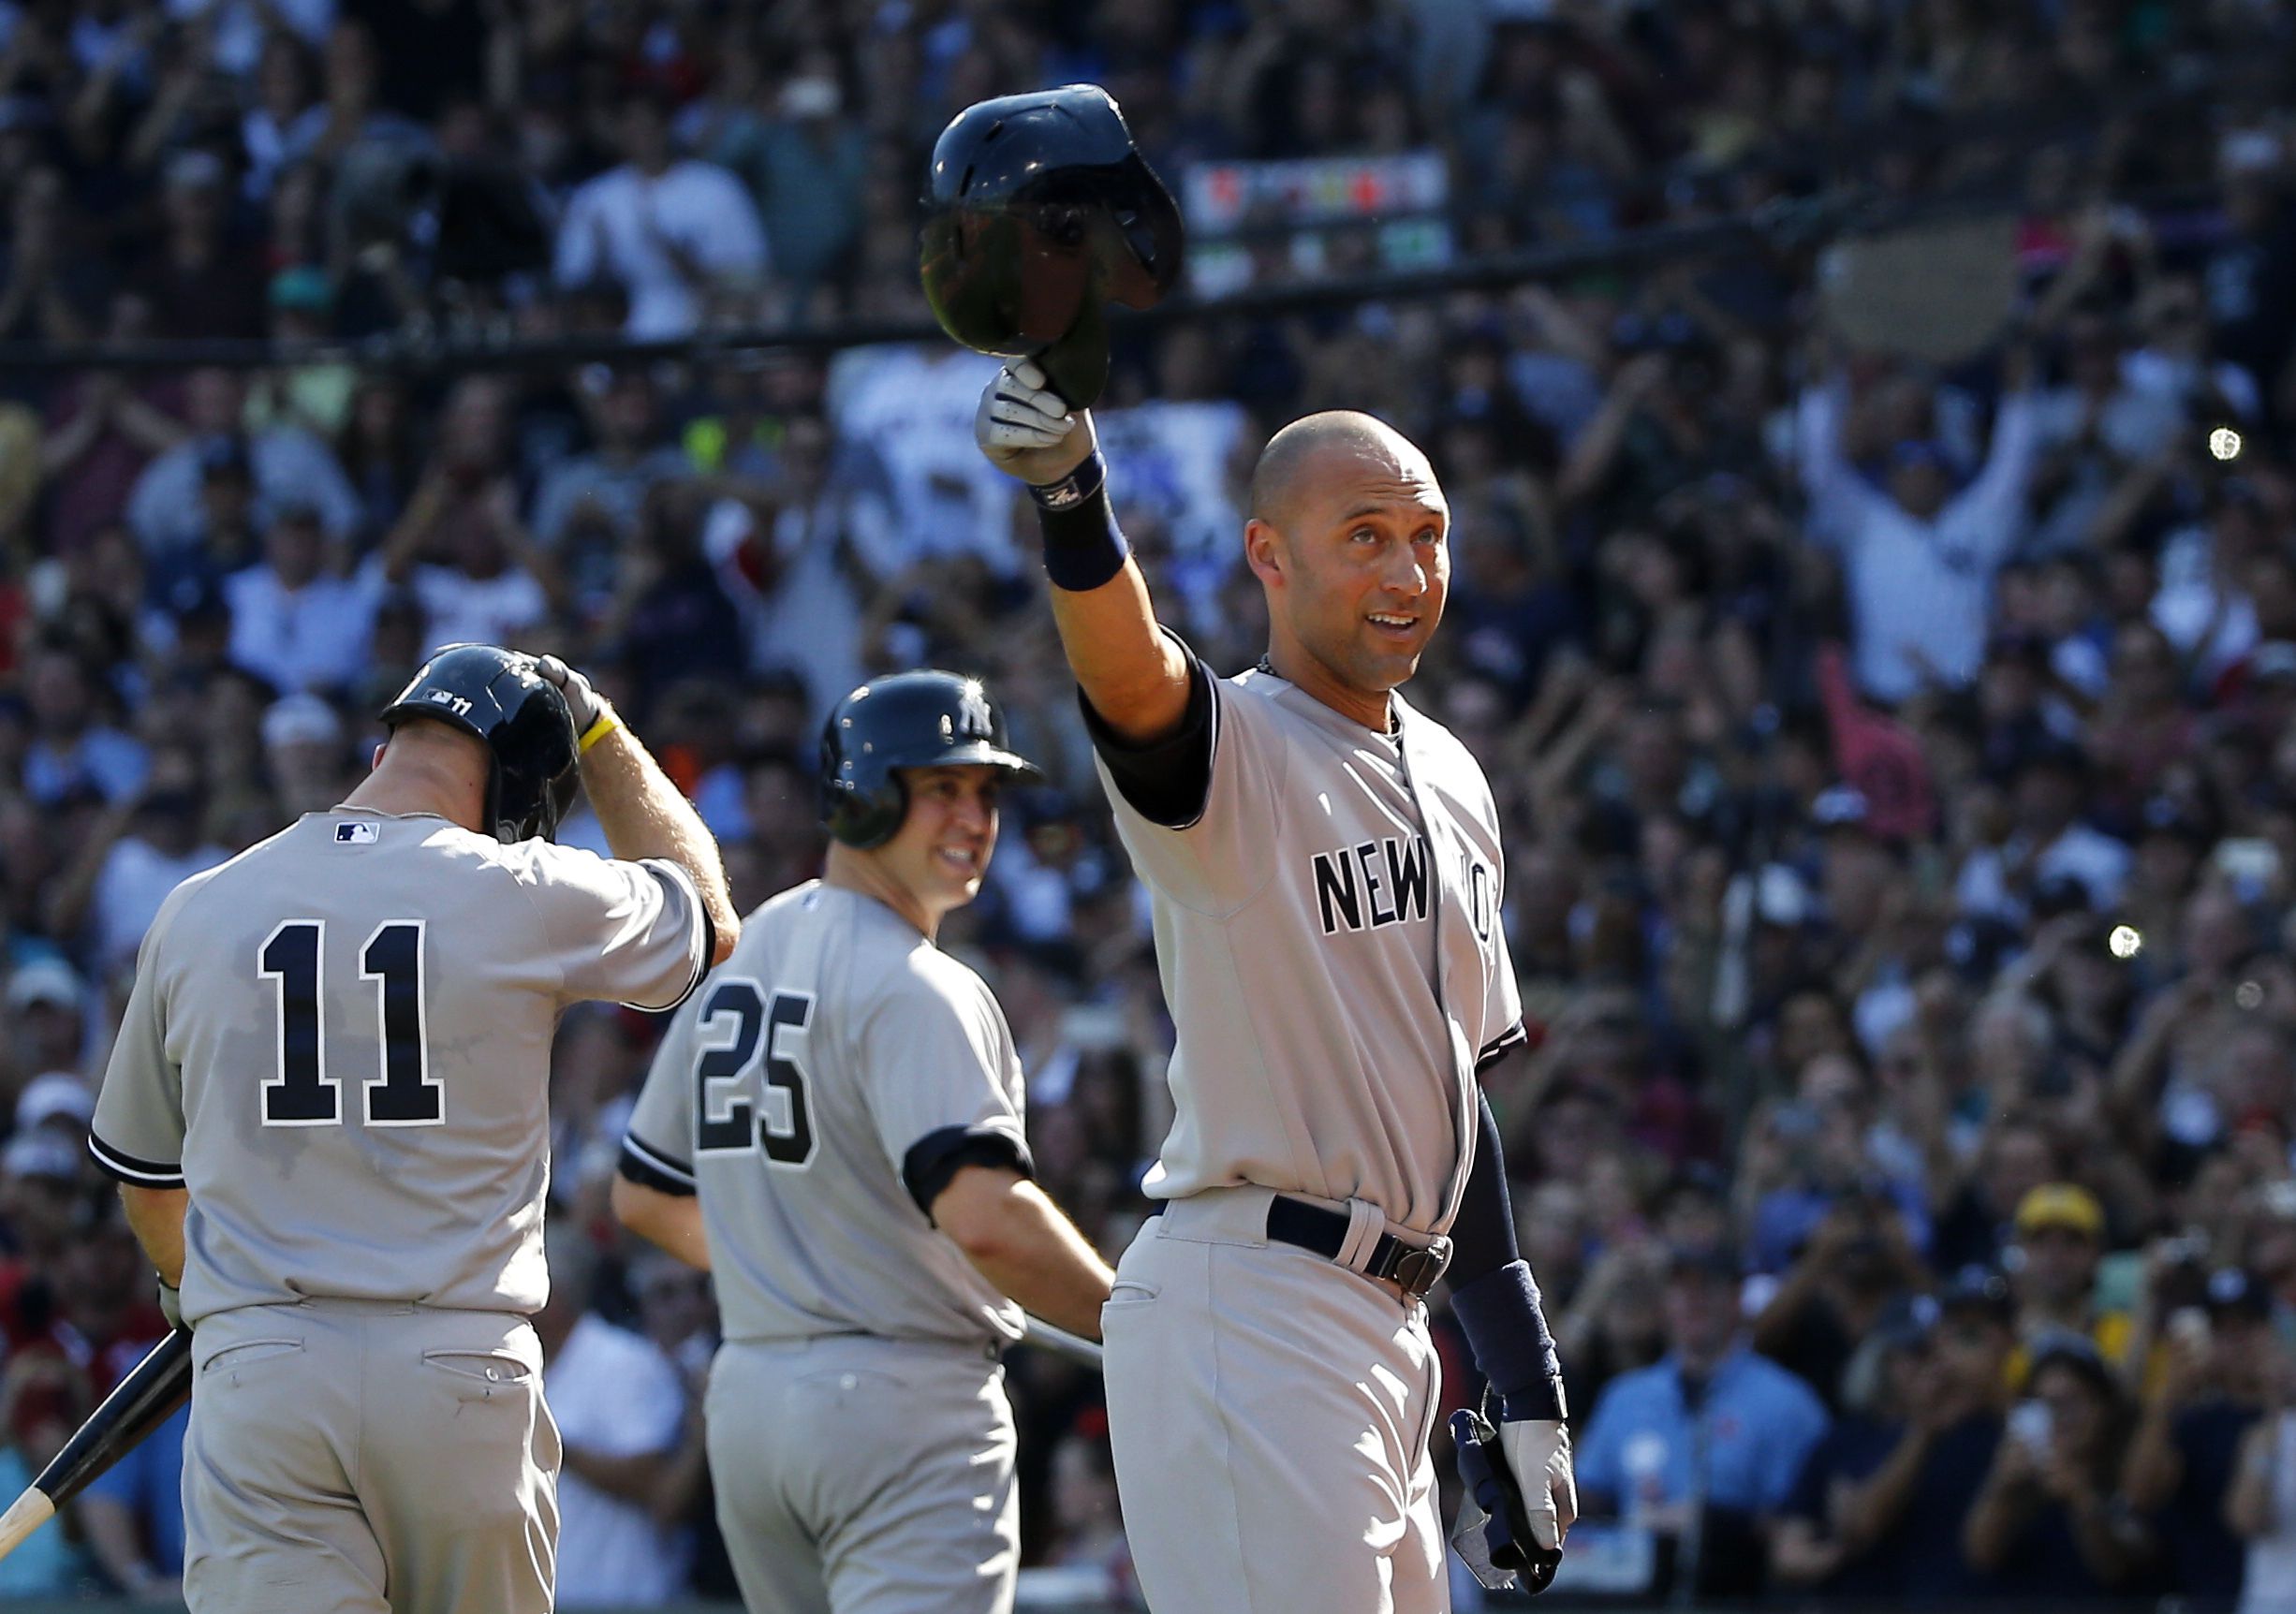 Yankees great Derek Jeter elected to Hall of Fame, but was it